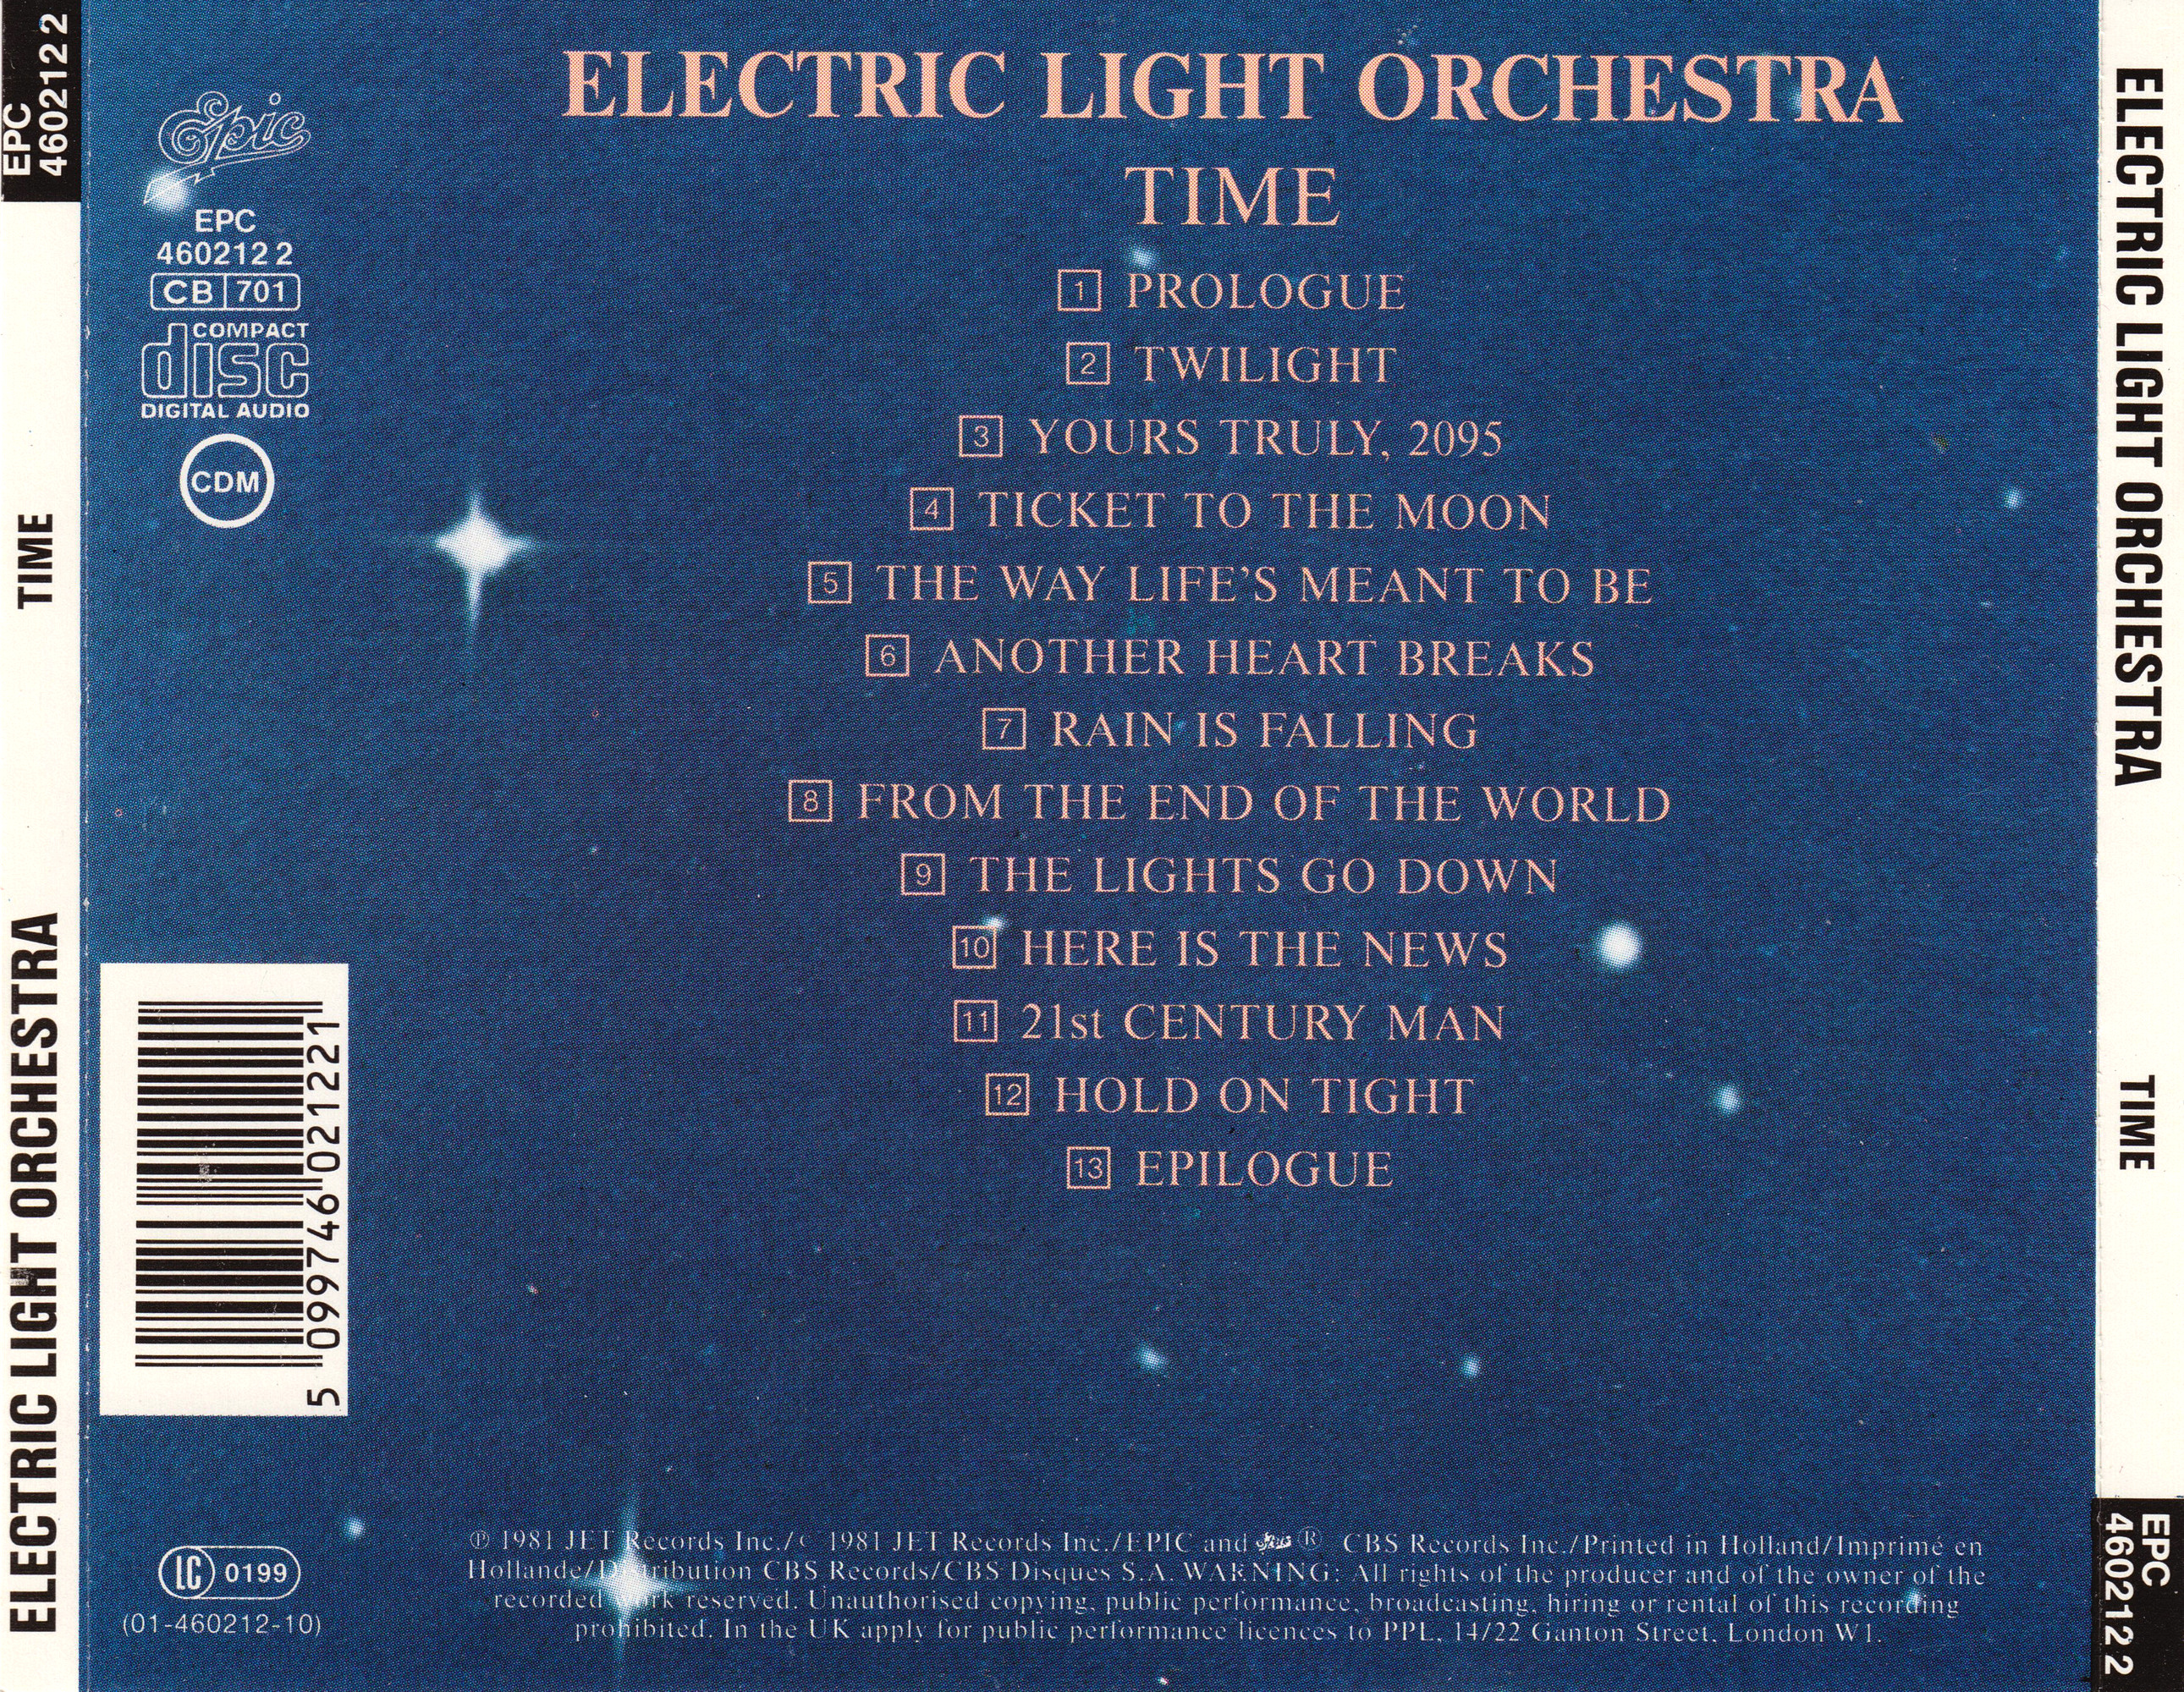 Electric light orchestra ticket to the. Electric Light Orchestra time 1981. Electric Light Orchestra time обложка. Electric Light Orchestra - time (1981-Japan). Elo - time - 1981 - LP.